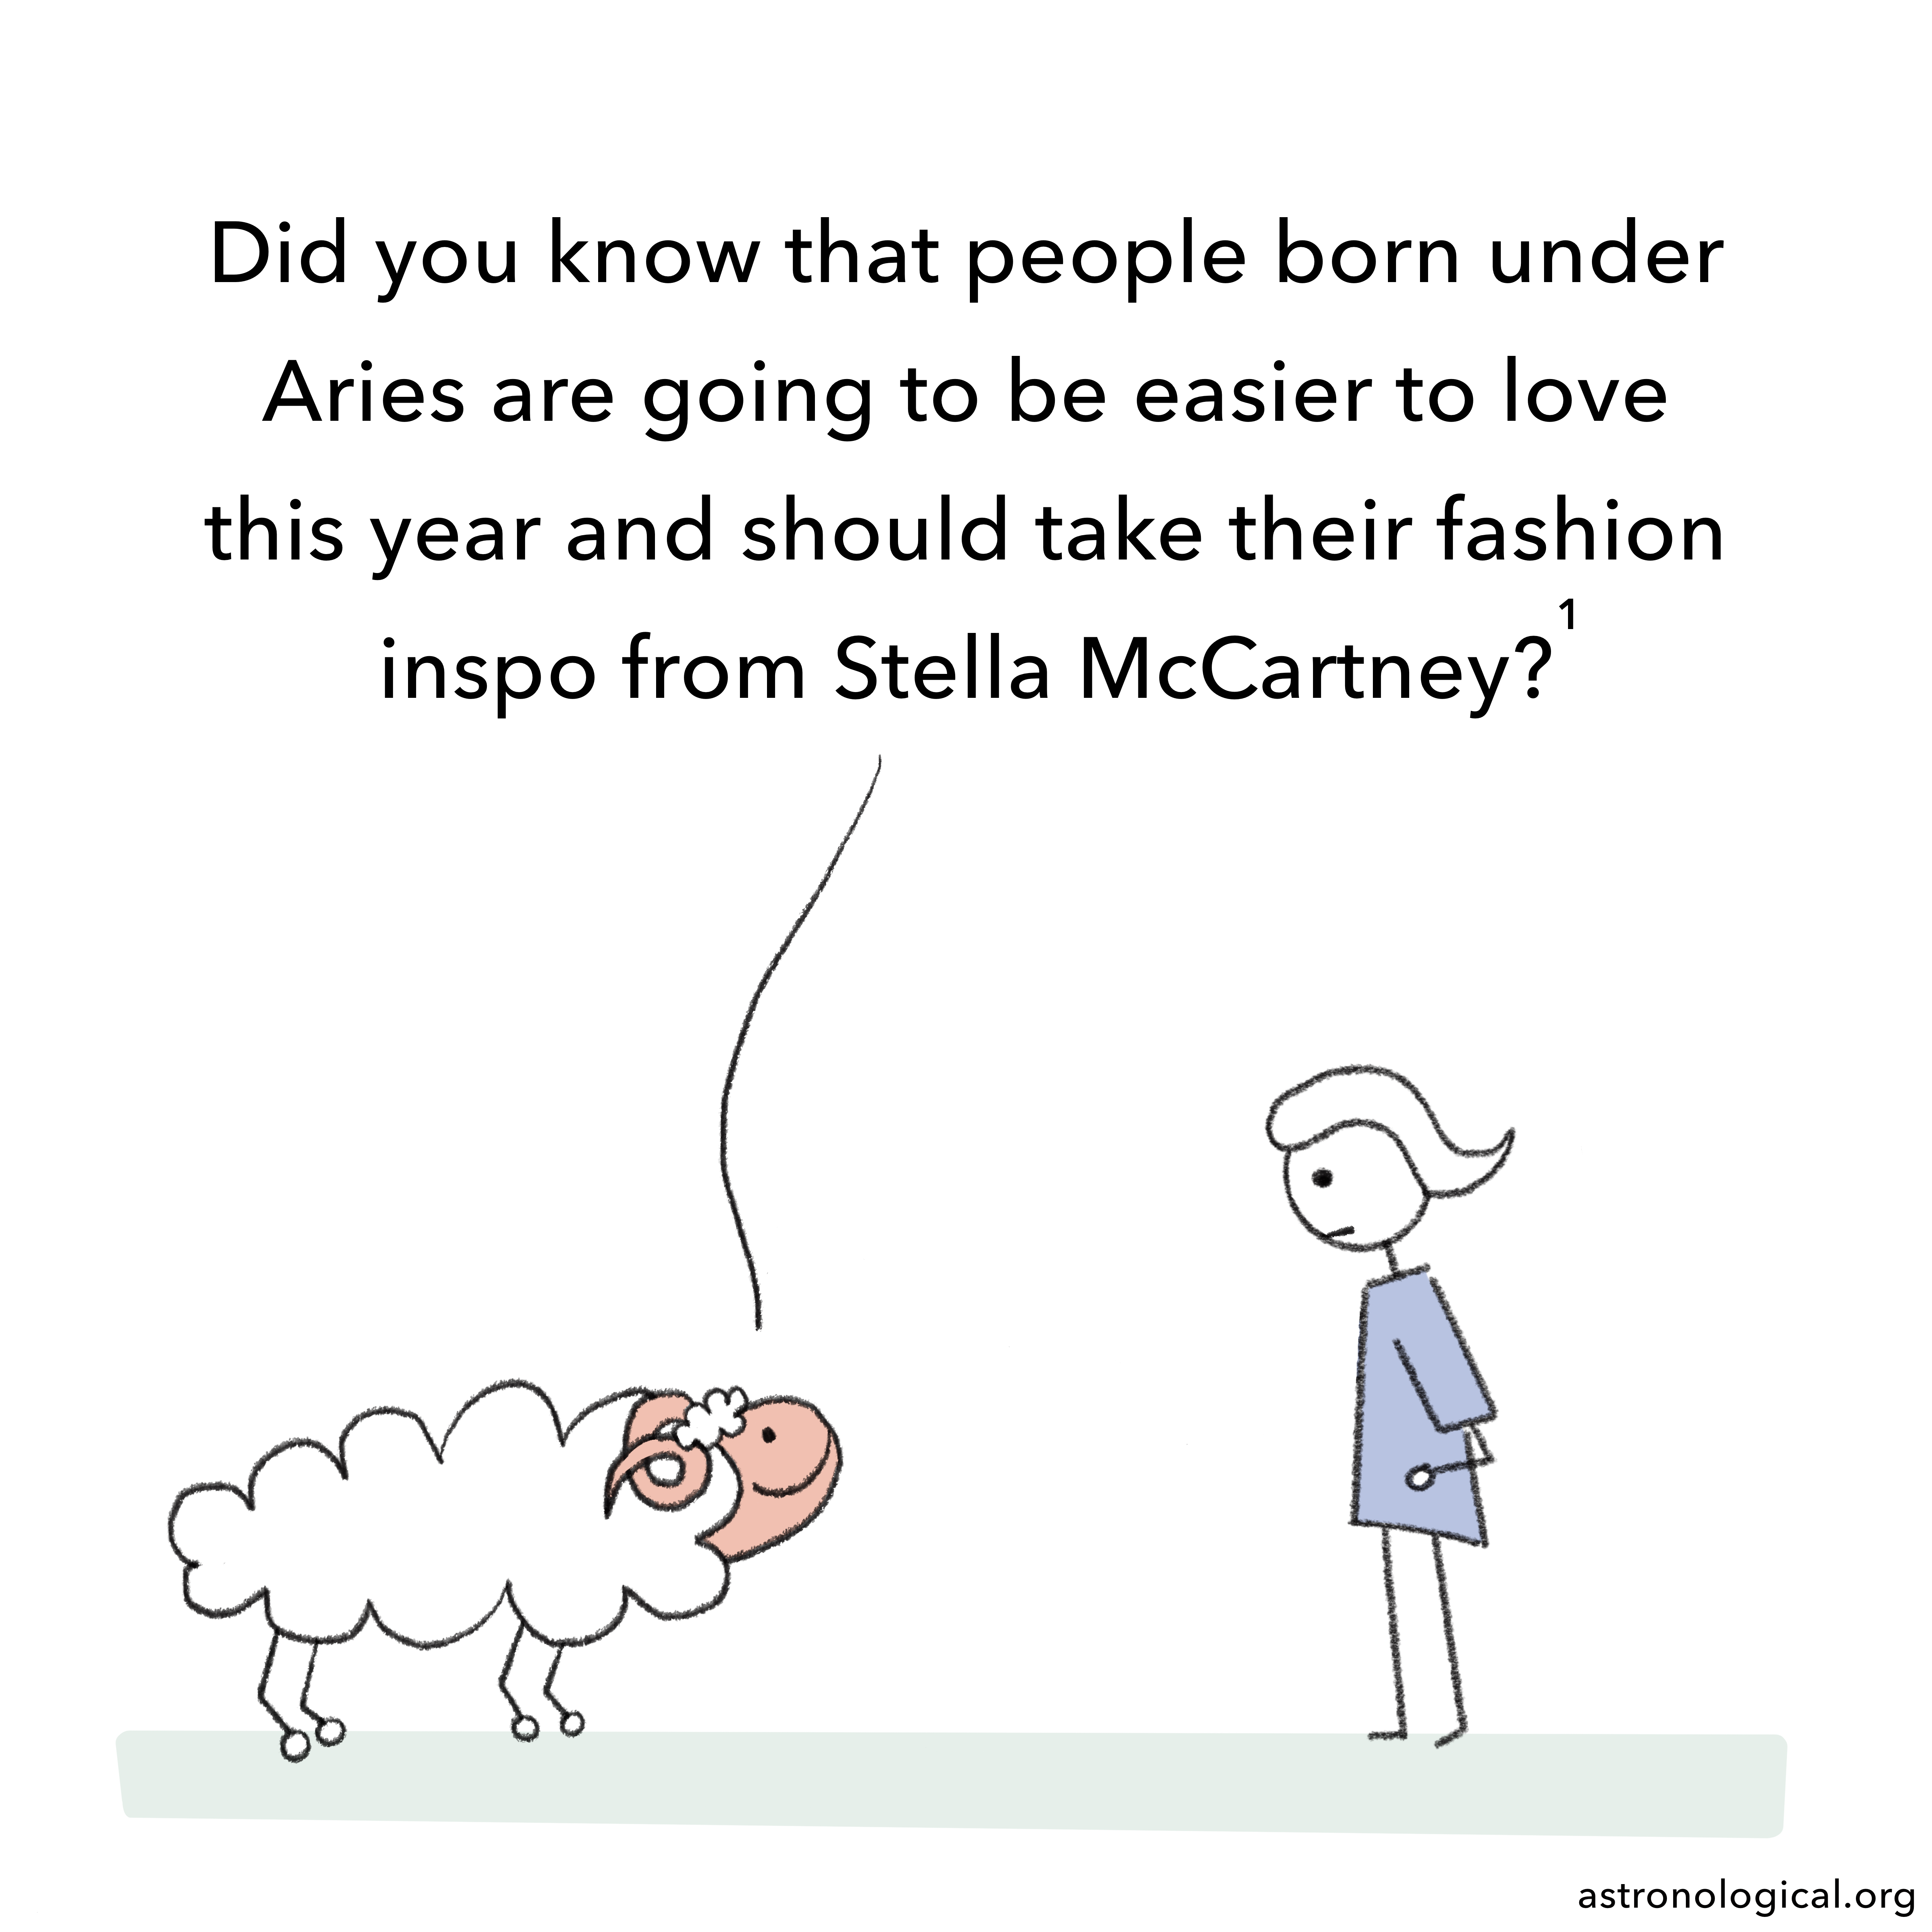 A cartoon ram says to a stick figure girl: Did you know that people born under Aries are going to be easier to love this year and should take their fashion inspo from Stella McCartney?